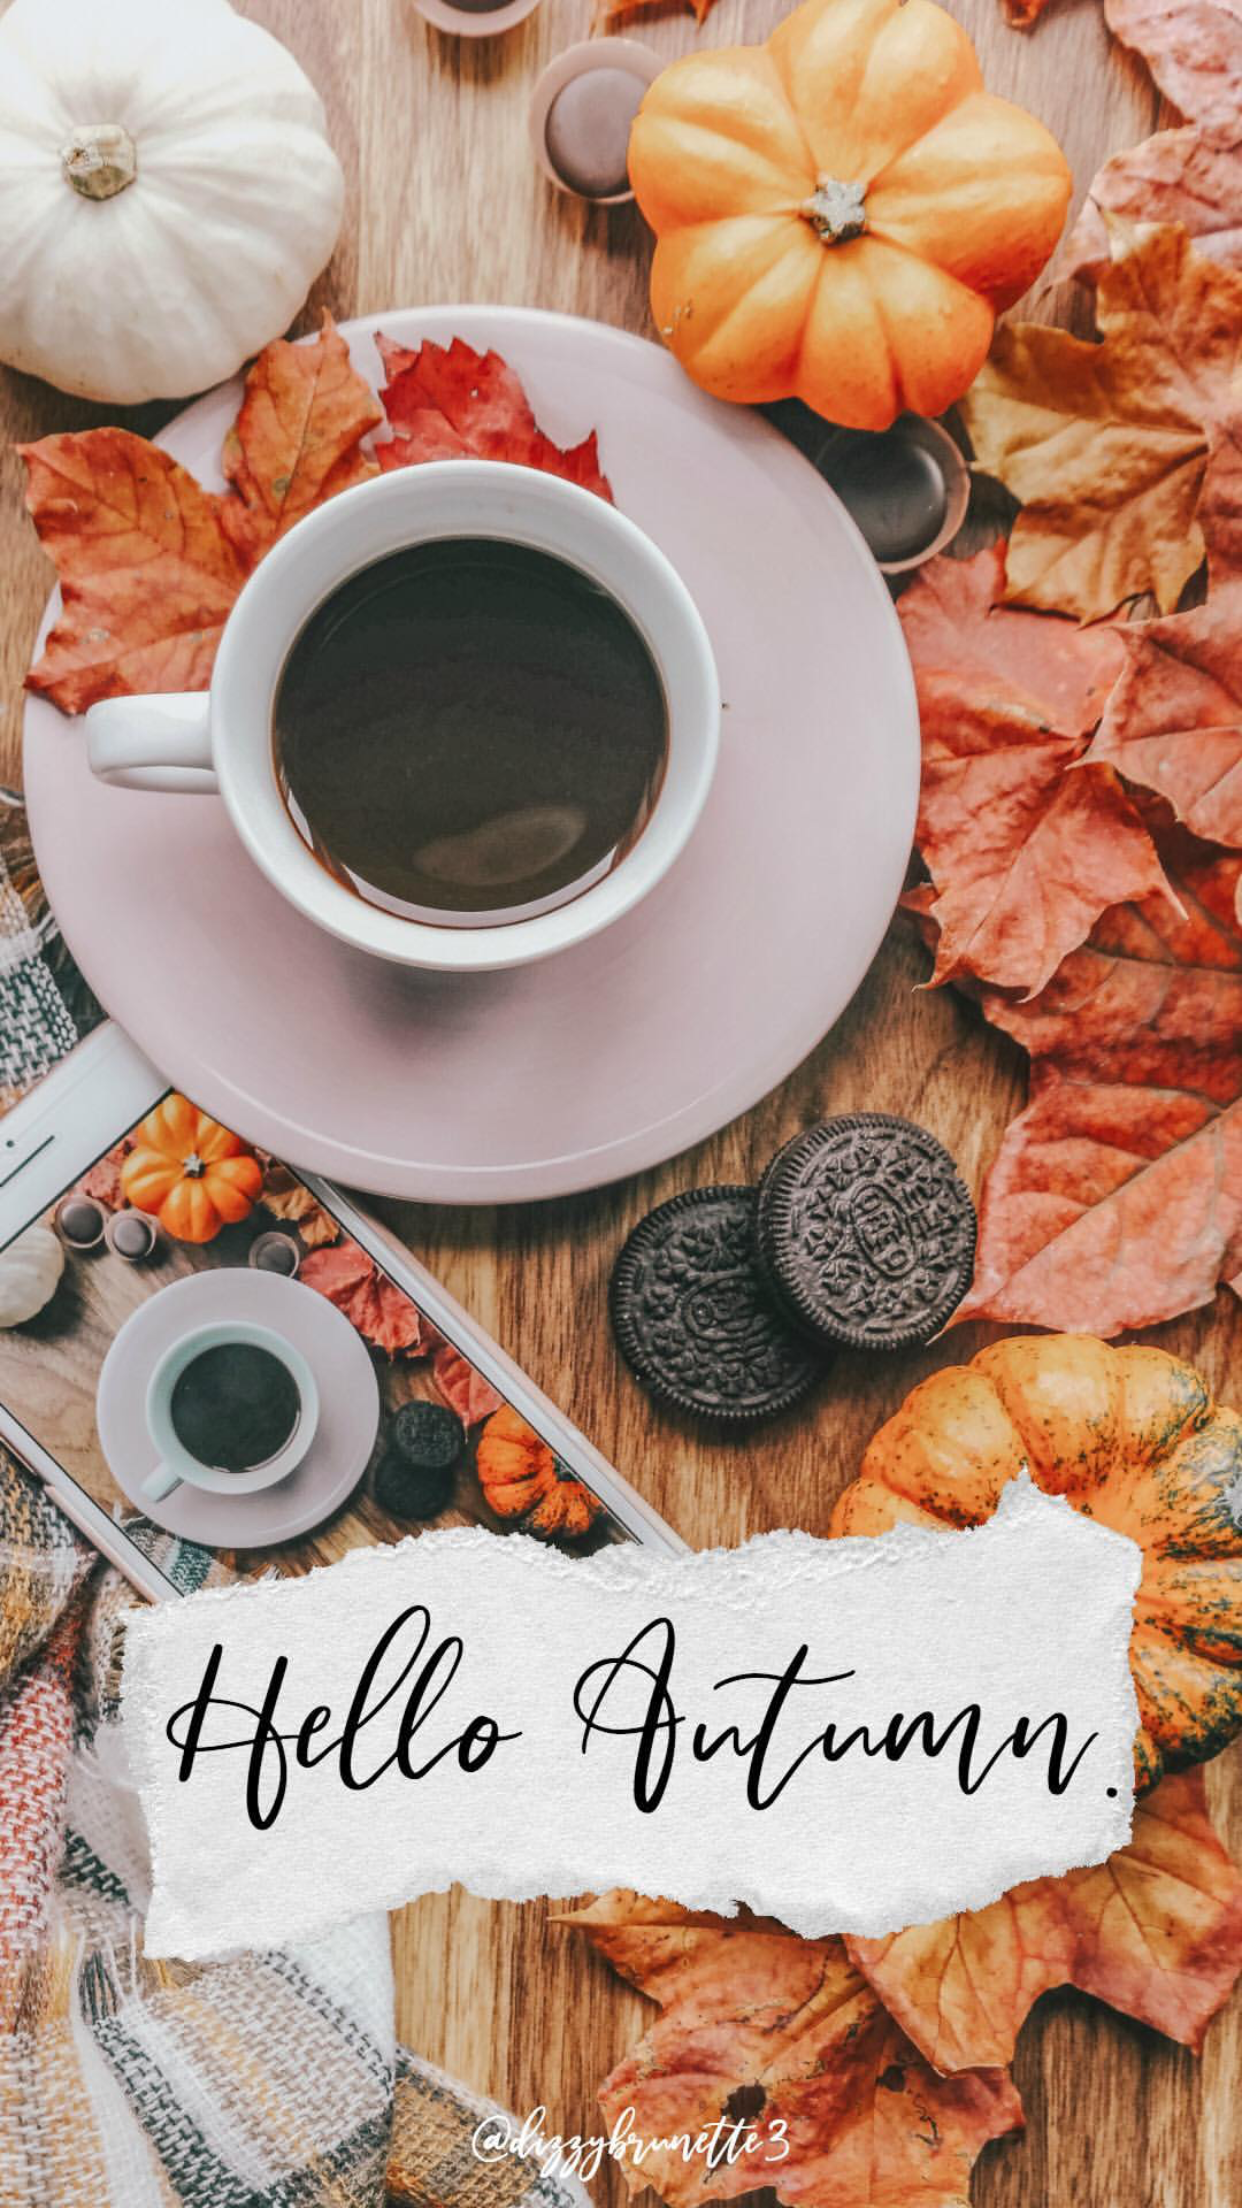 AUTUMN IPHONE WALLPAPERS. Fall wallpaper, iPhone wallpaper vintage, Free phone wallpaper